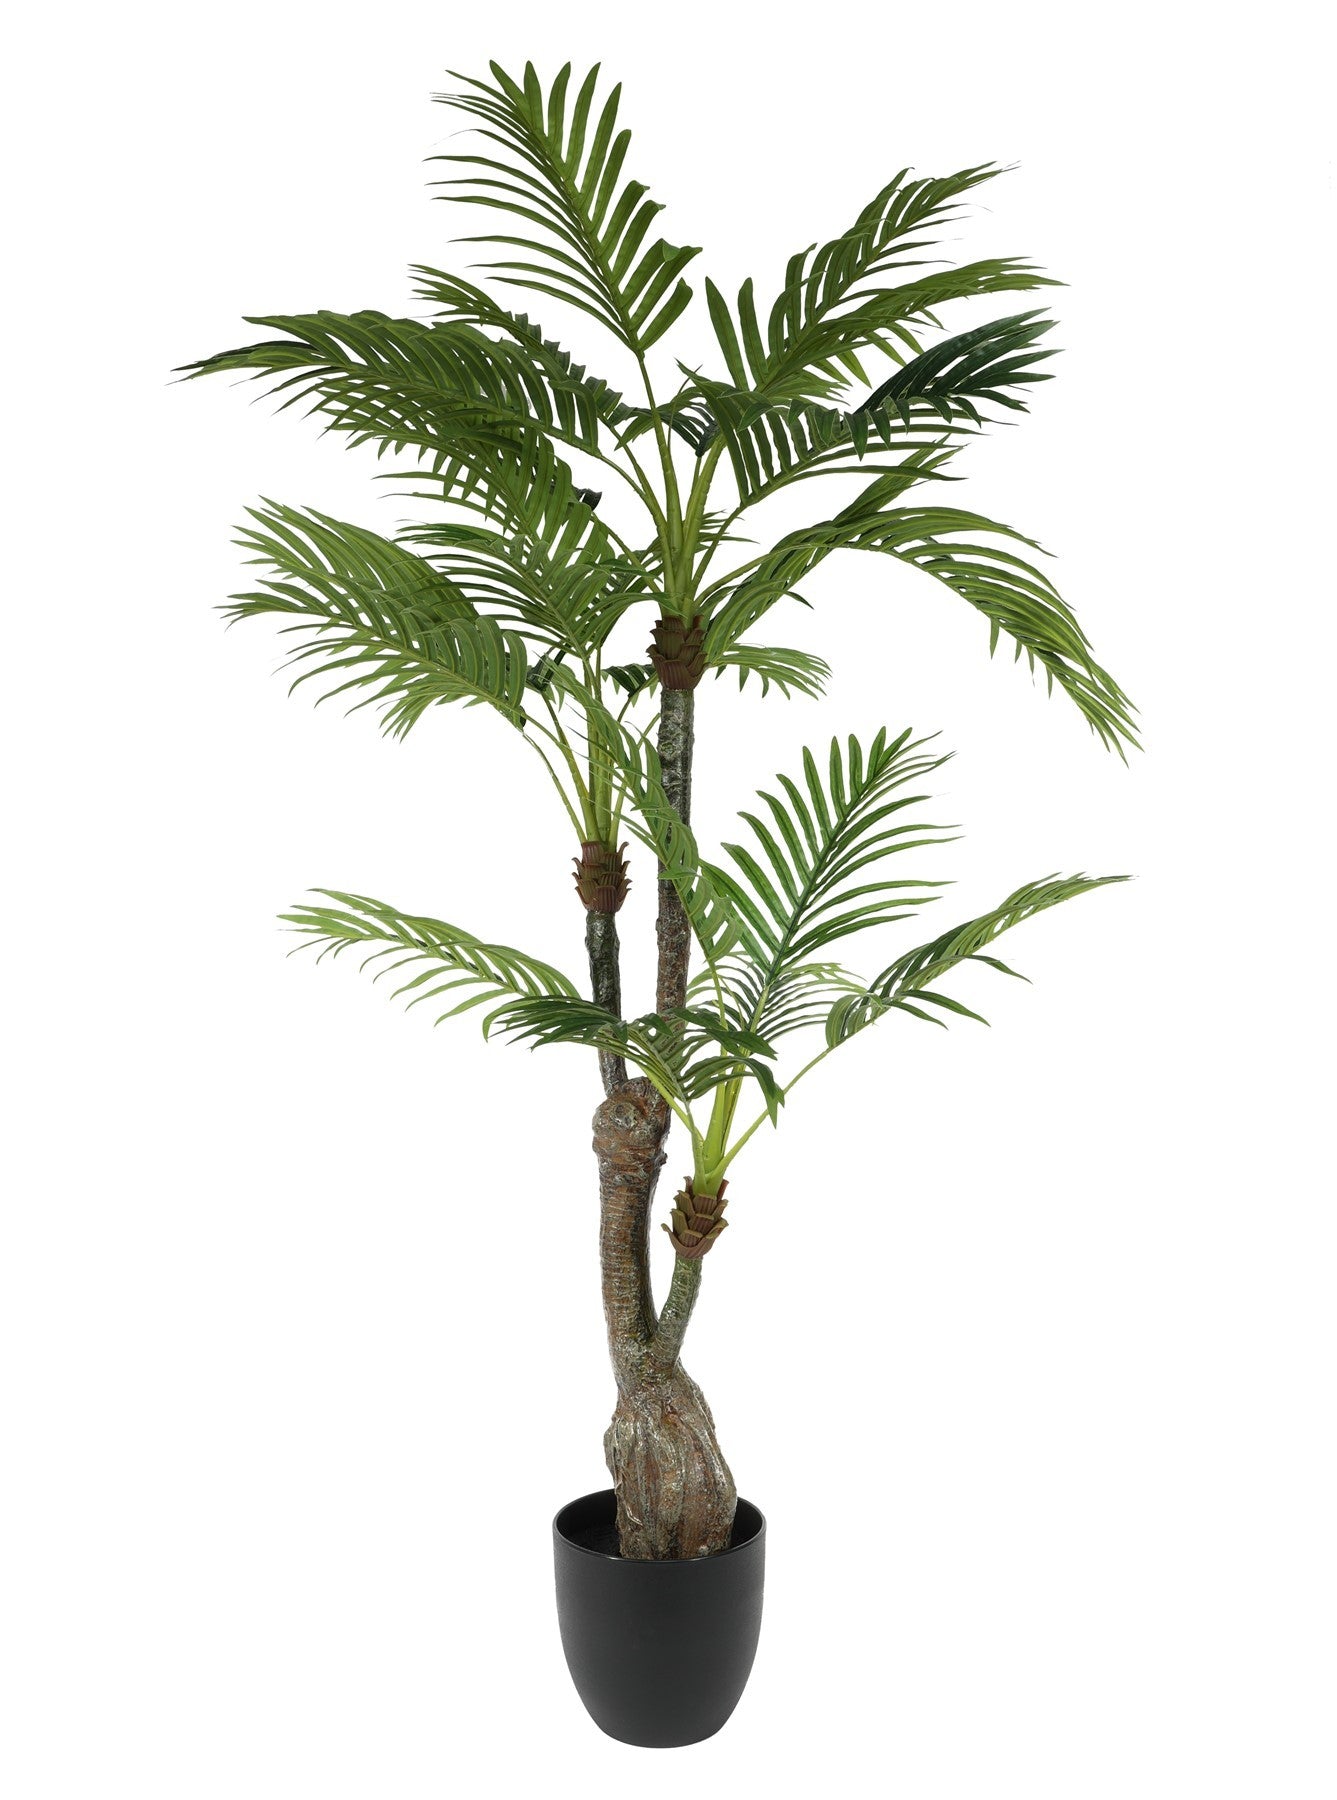 View Palm Potted House Plant 130cm information